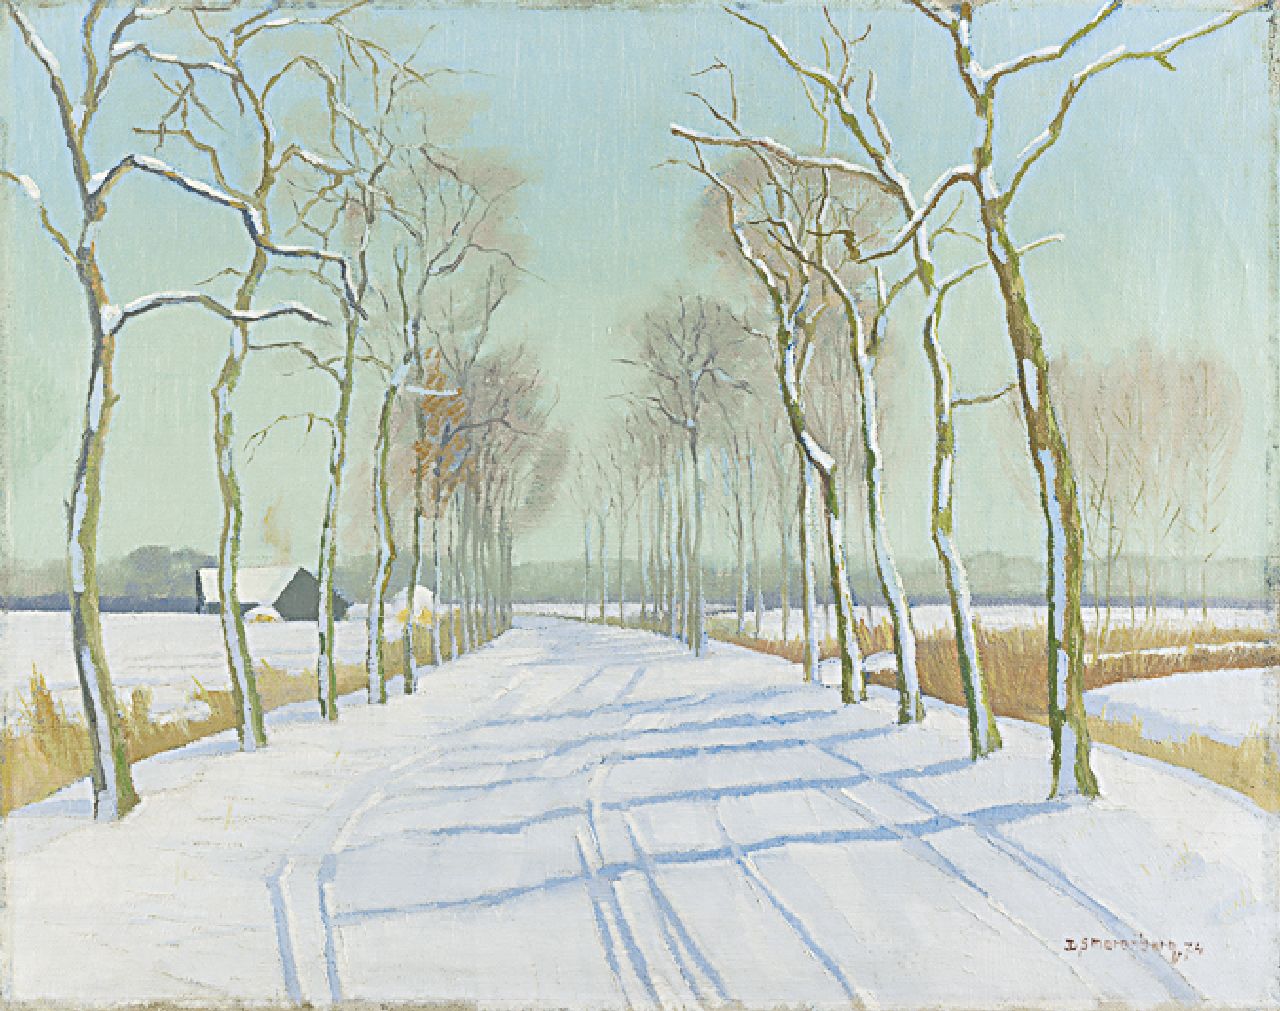 Smorenberg D.  | Dirk Smorenberg, The Oude Wierdenseweg, Almelo, oil on canvas 31.2 x 39.4 cm, signed l.r. and dated '24